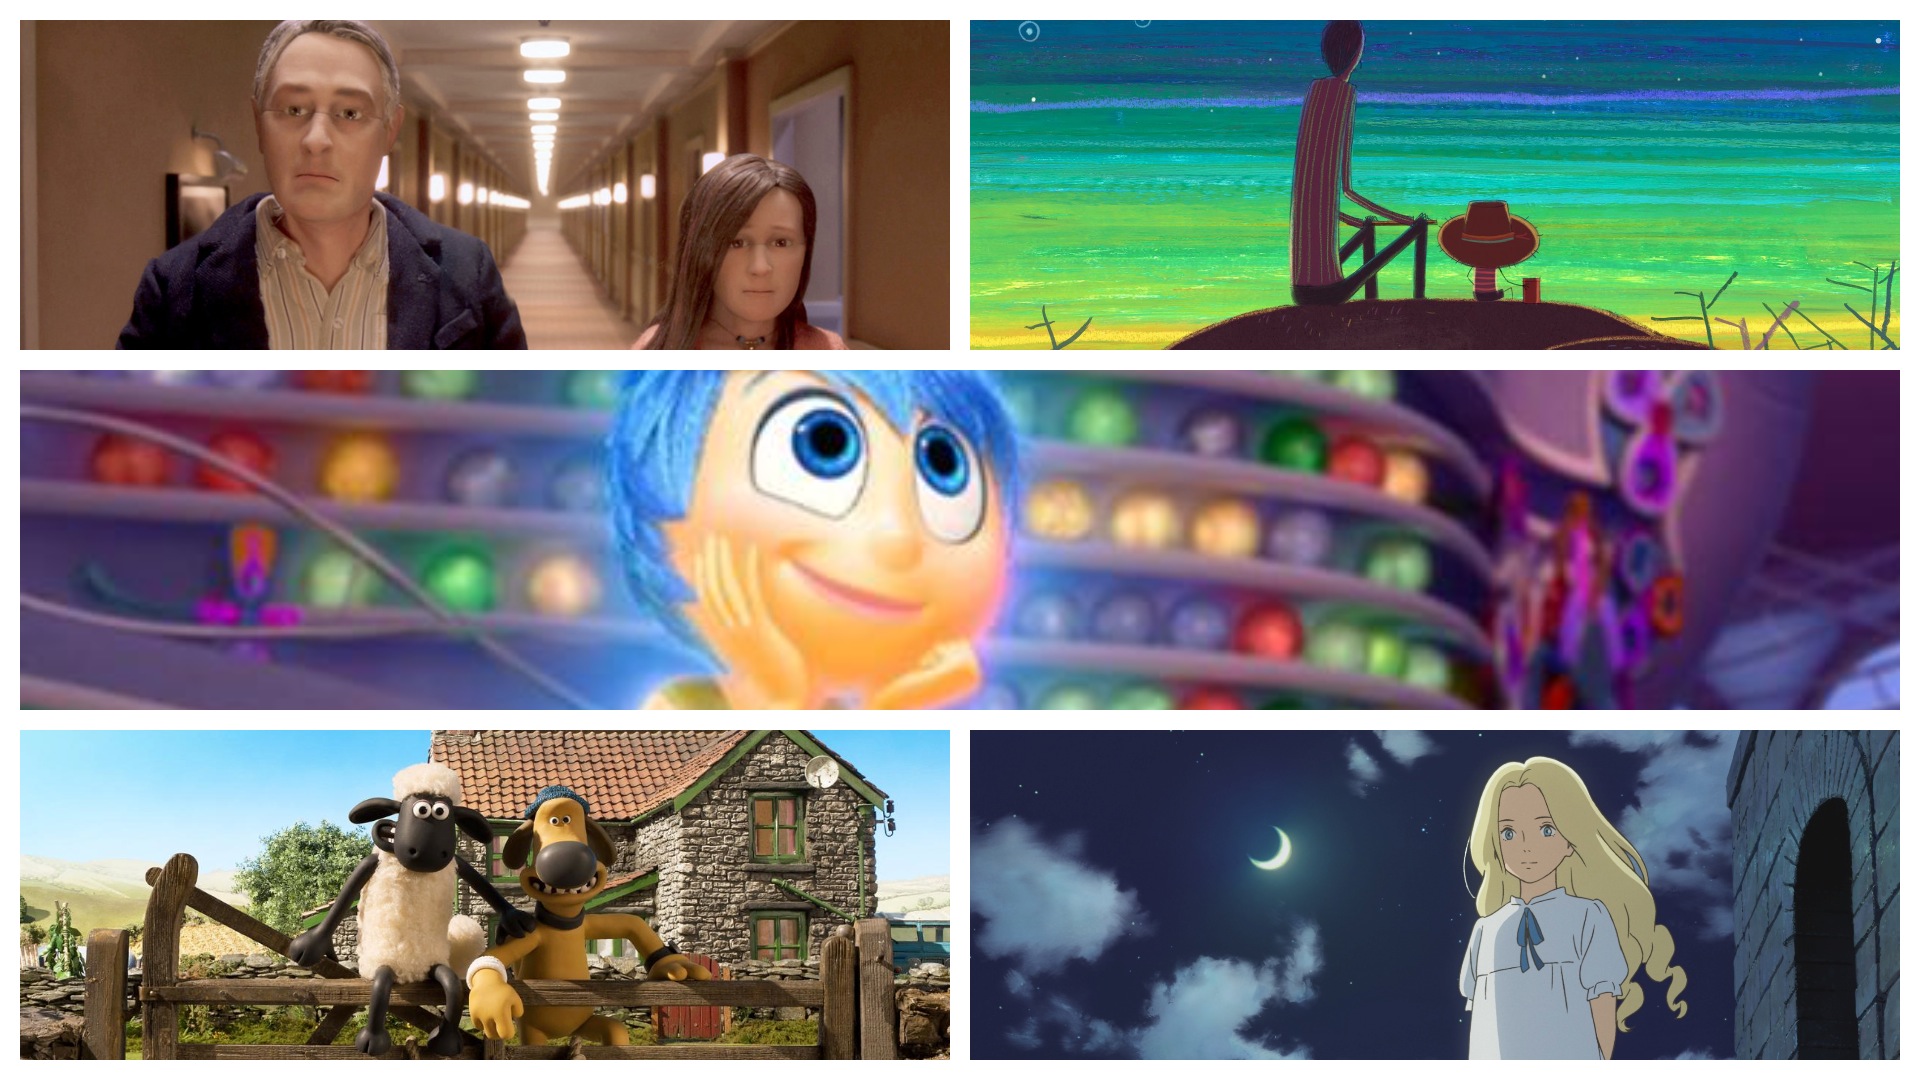 Animated picture, oscars 2016, oscars predictions